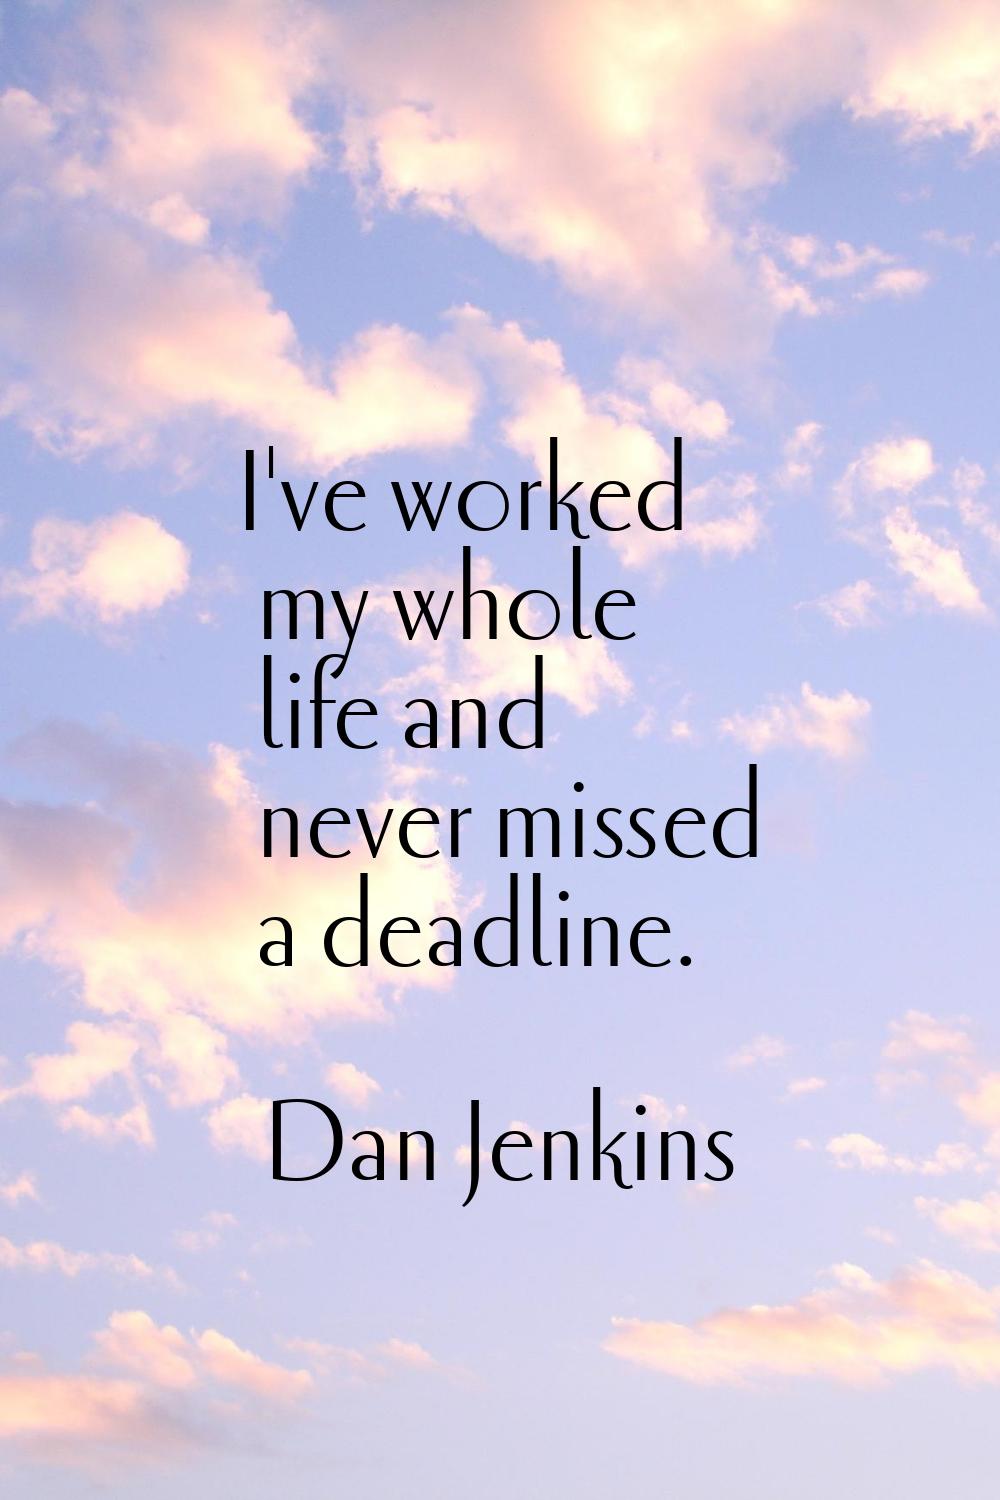 I've worked my whole life and never missed a deadline.